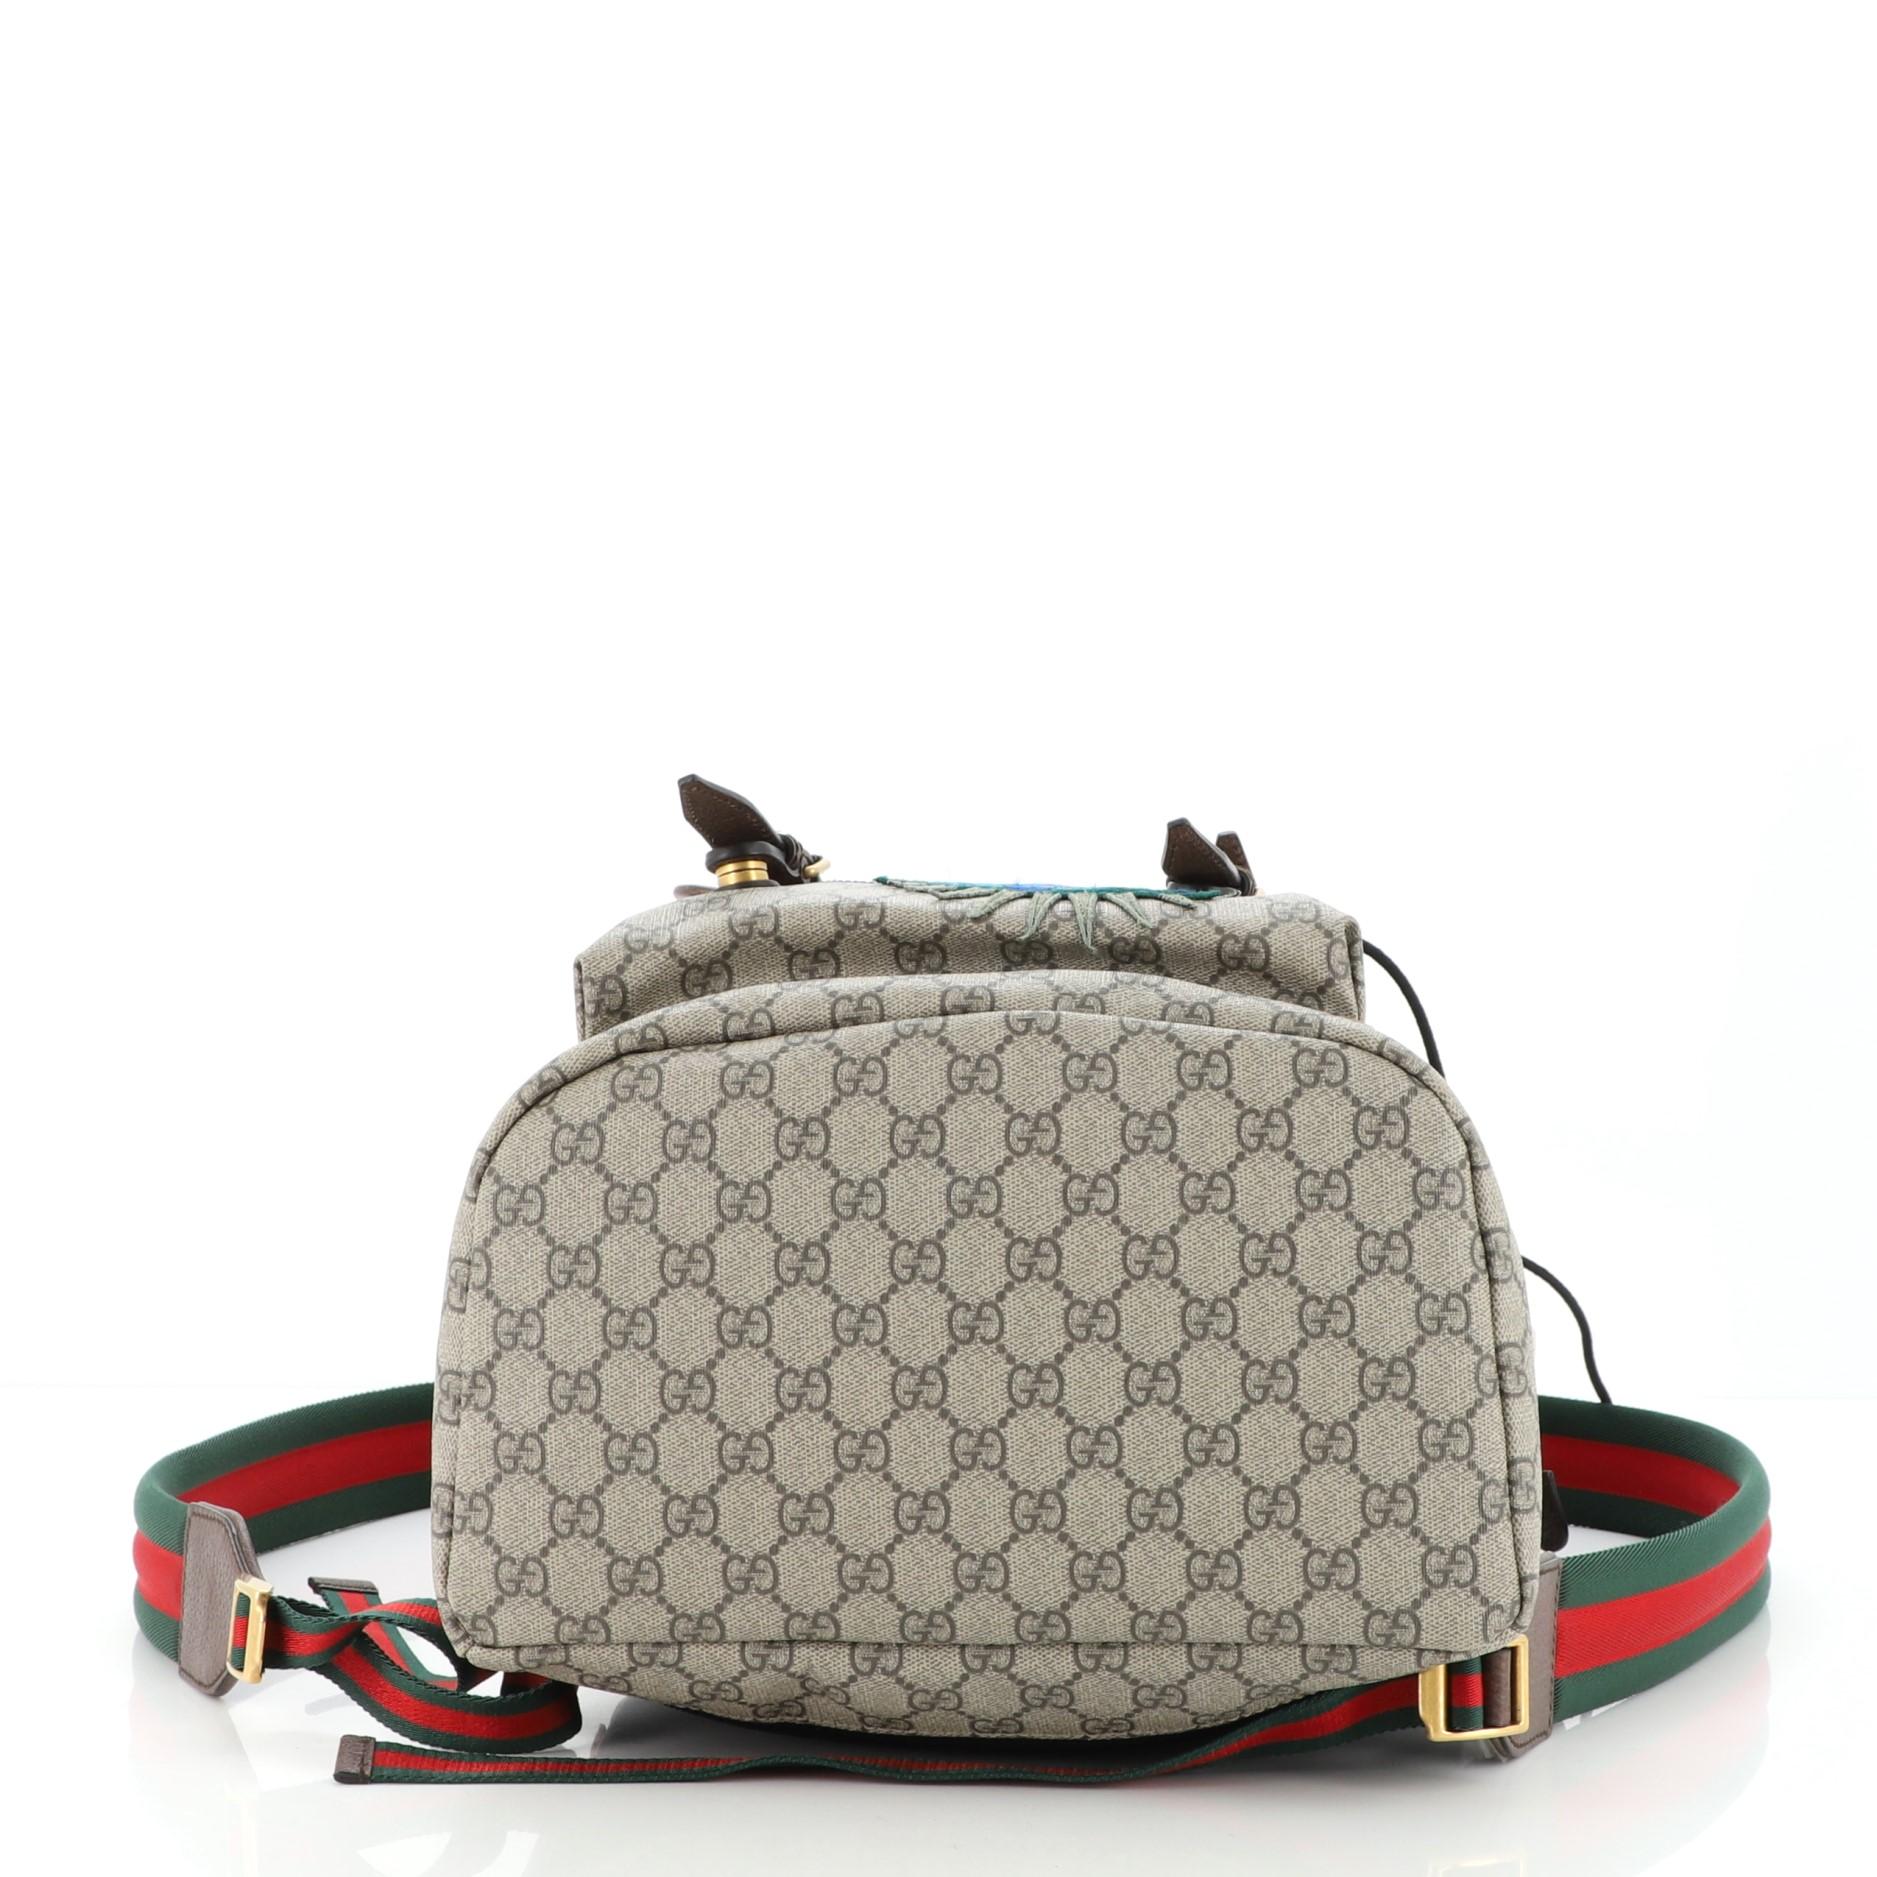 gucci backpack black with green and red straps